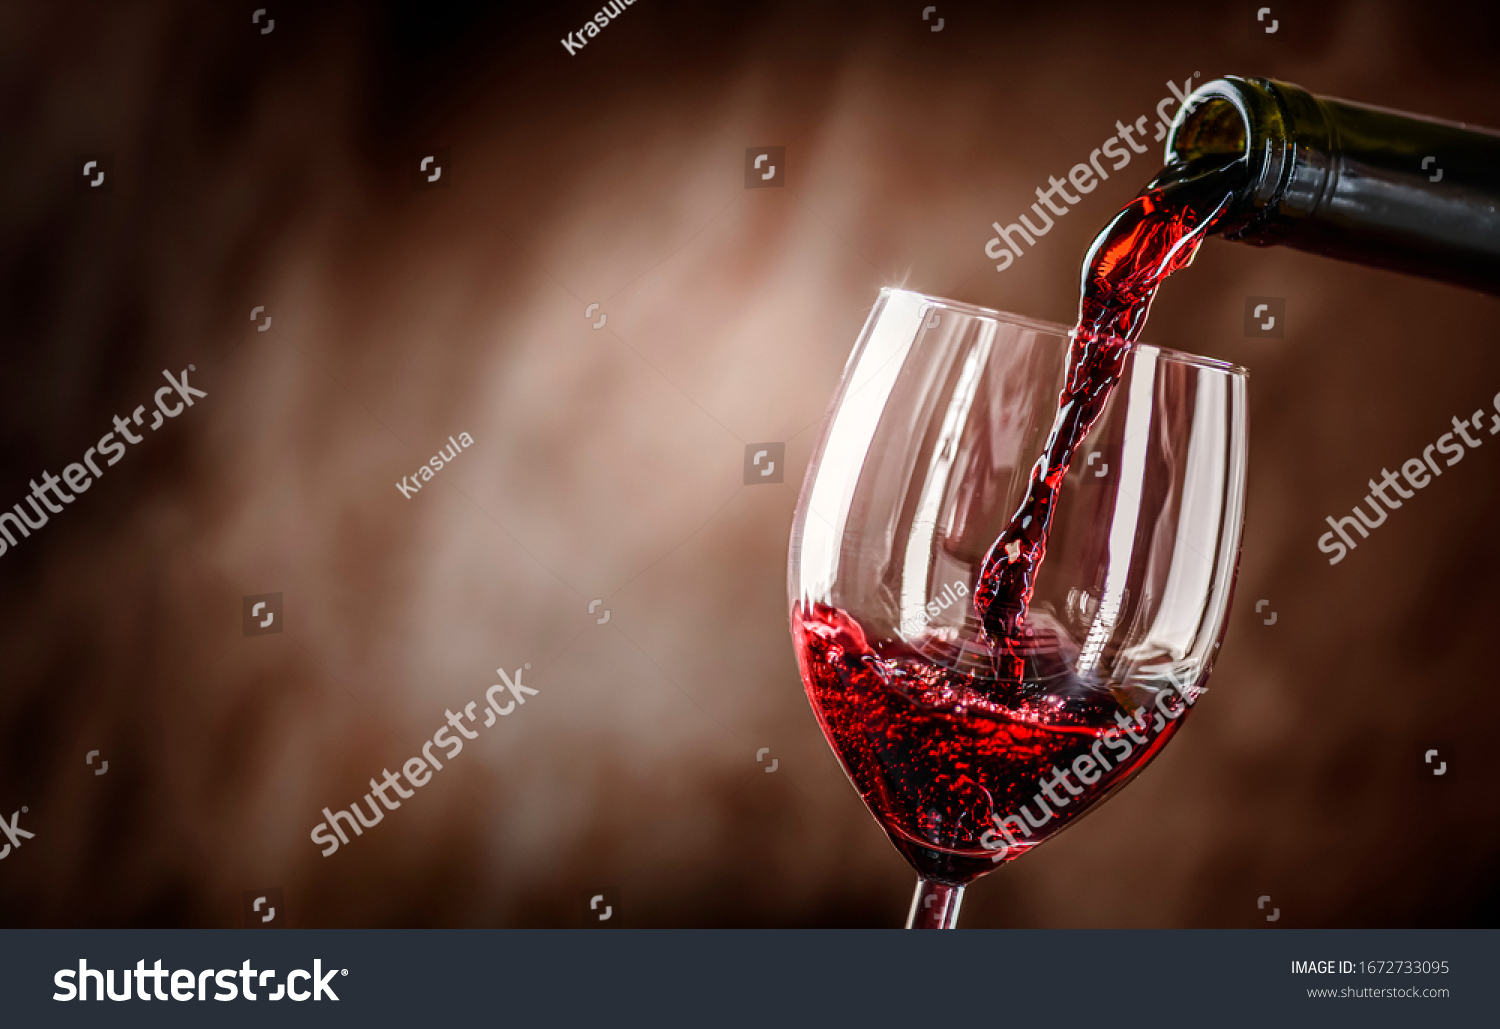 Pouring red wine into the glass against rustic background.  Pour alcohol, winery concept. #1672733095